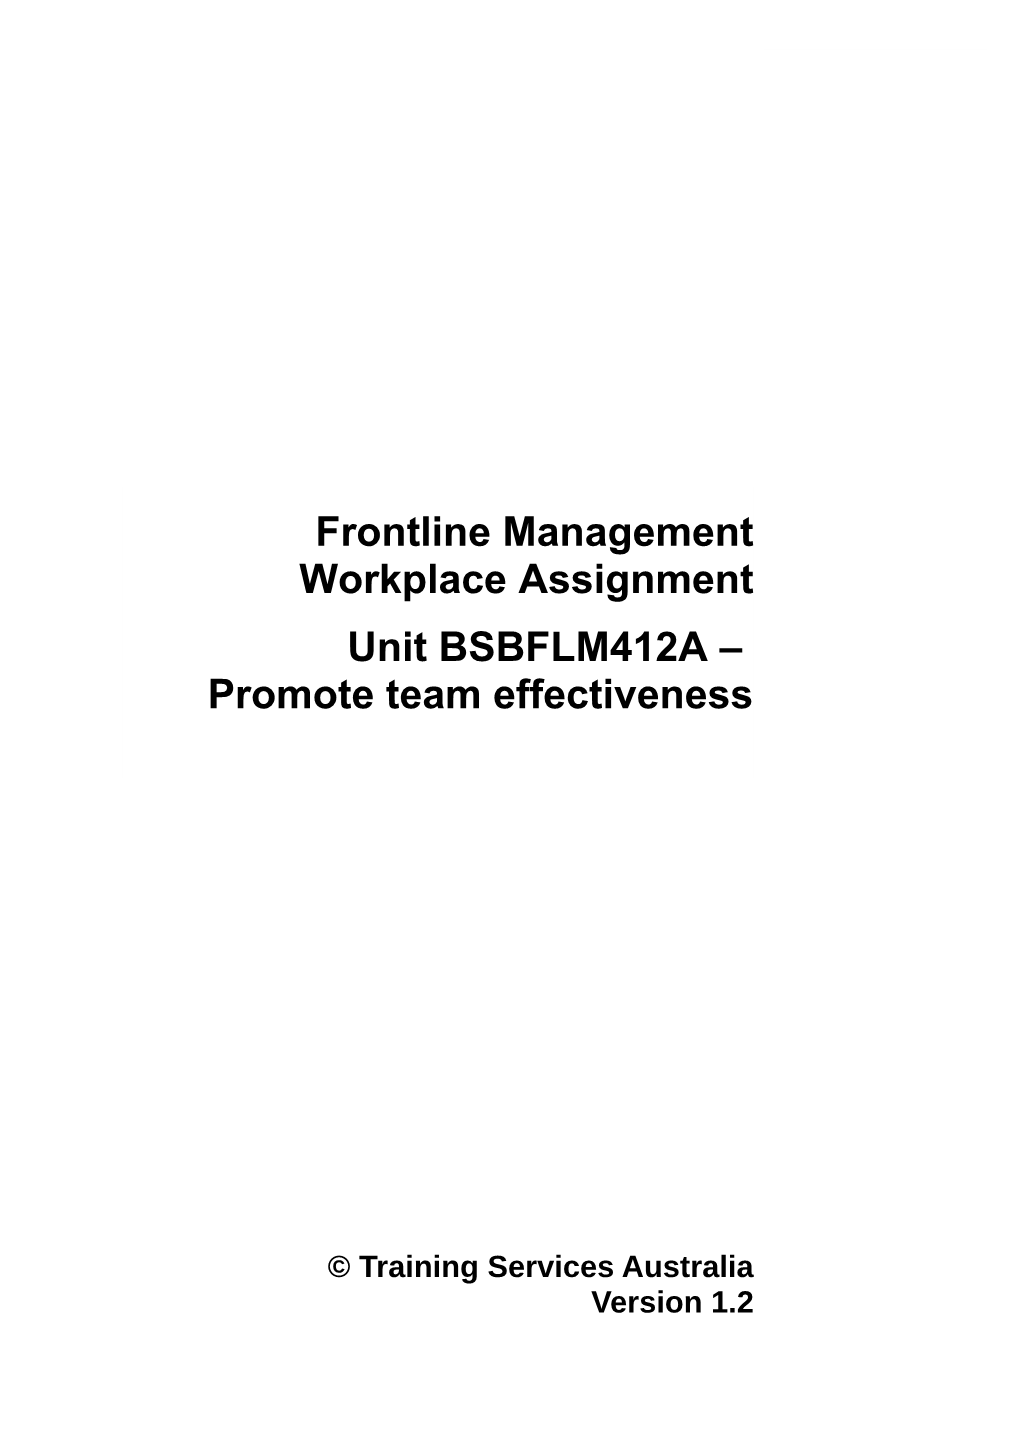 Frontline Management Workplace Assignment Bsbflm412aversion 1.2